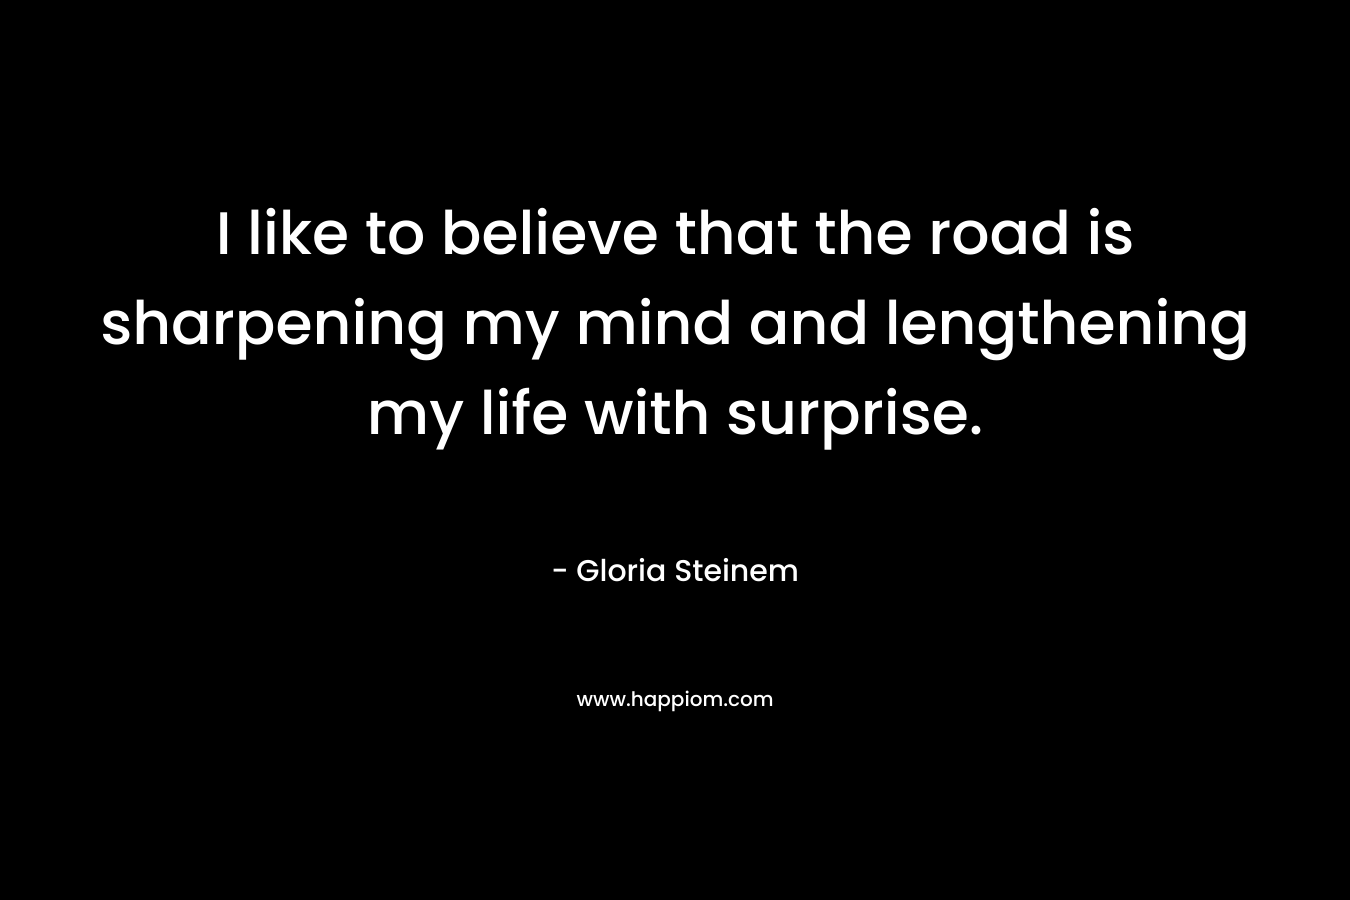 I like to believe that the road is sharpening my mind and lengthening my life with surprise.